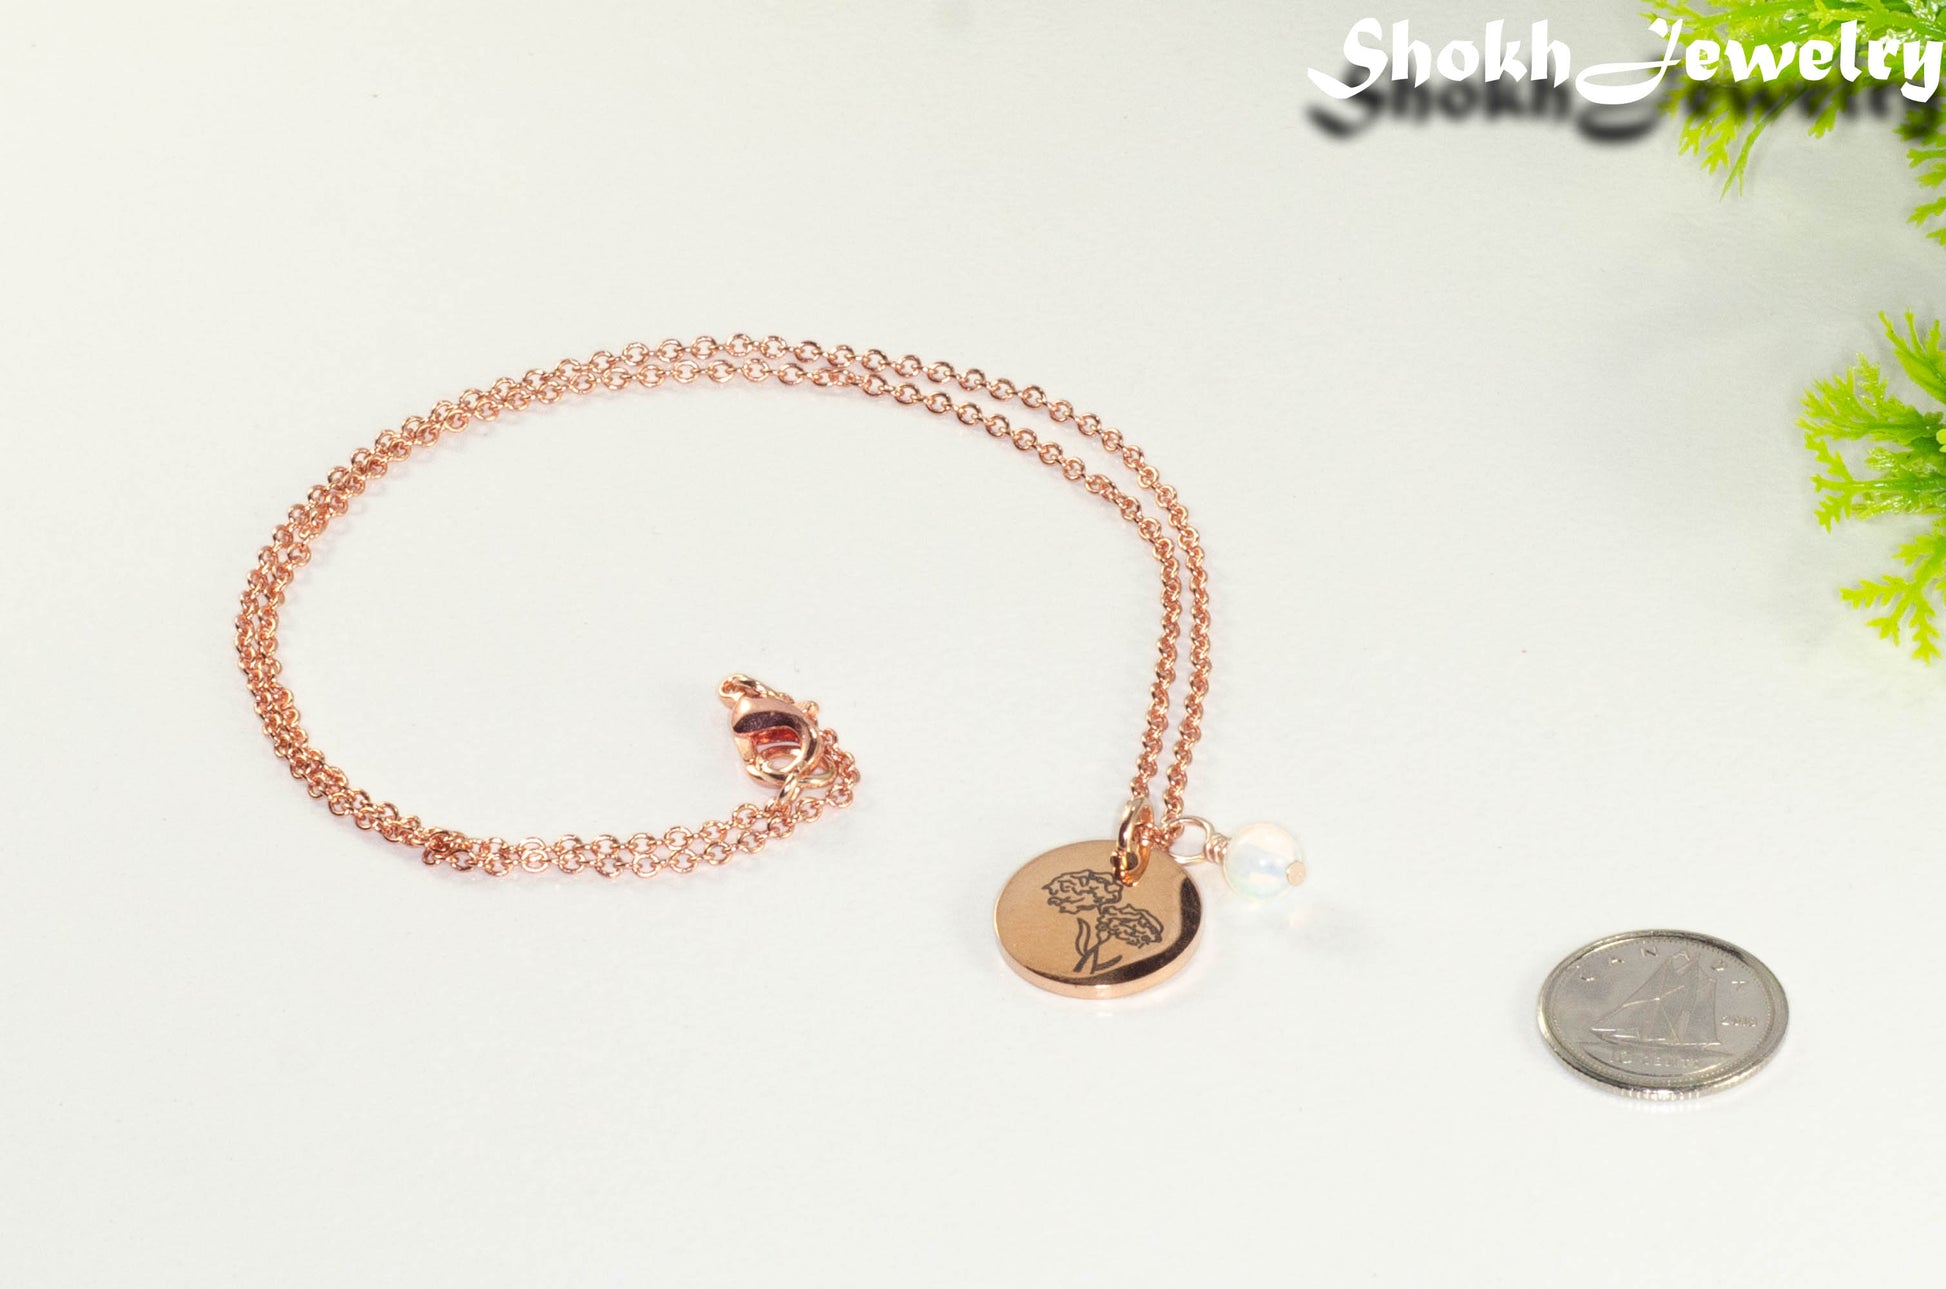 Rose Gold Plated October Birth Flower Necklace with White Opal Birthstone Pendant beside a dime.